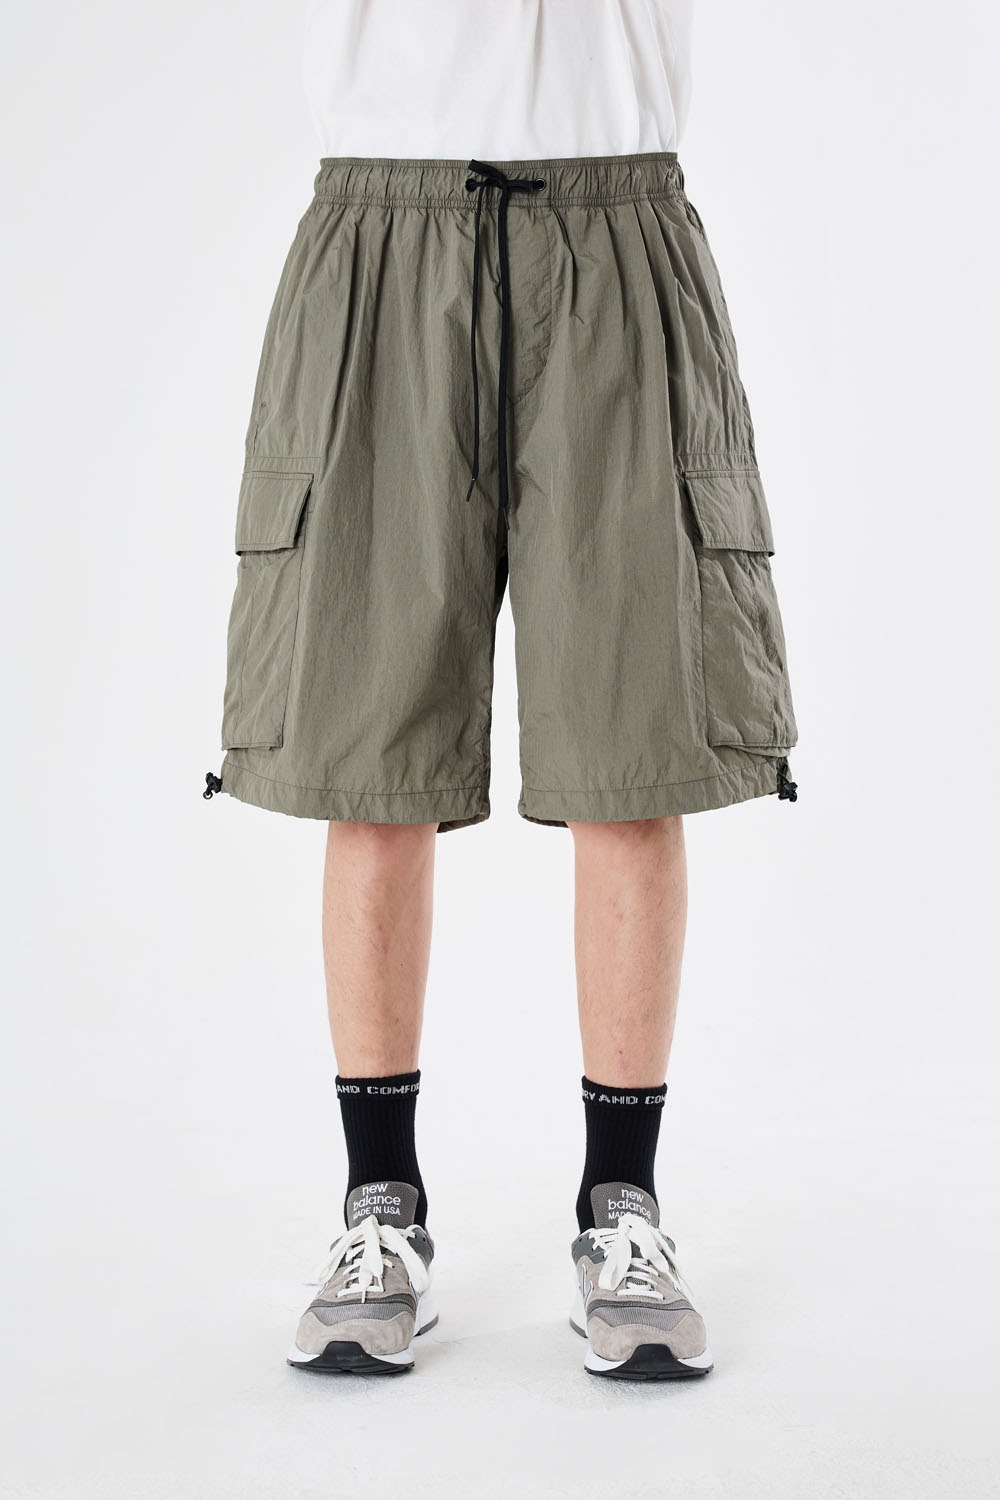 Over Mil 6p Shorts-Stone Ripstop